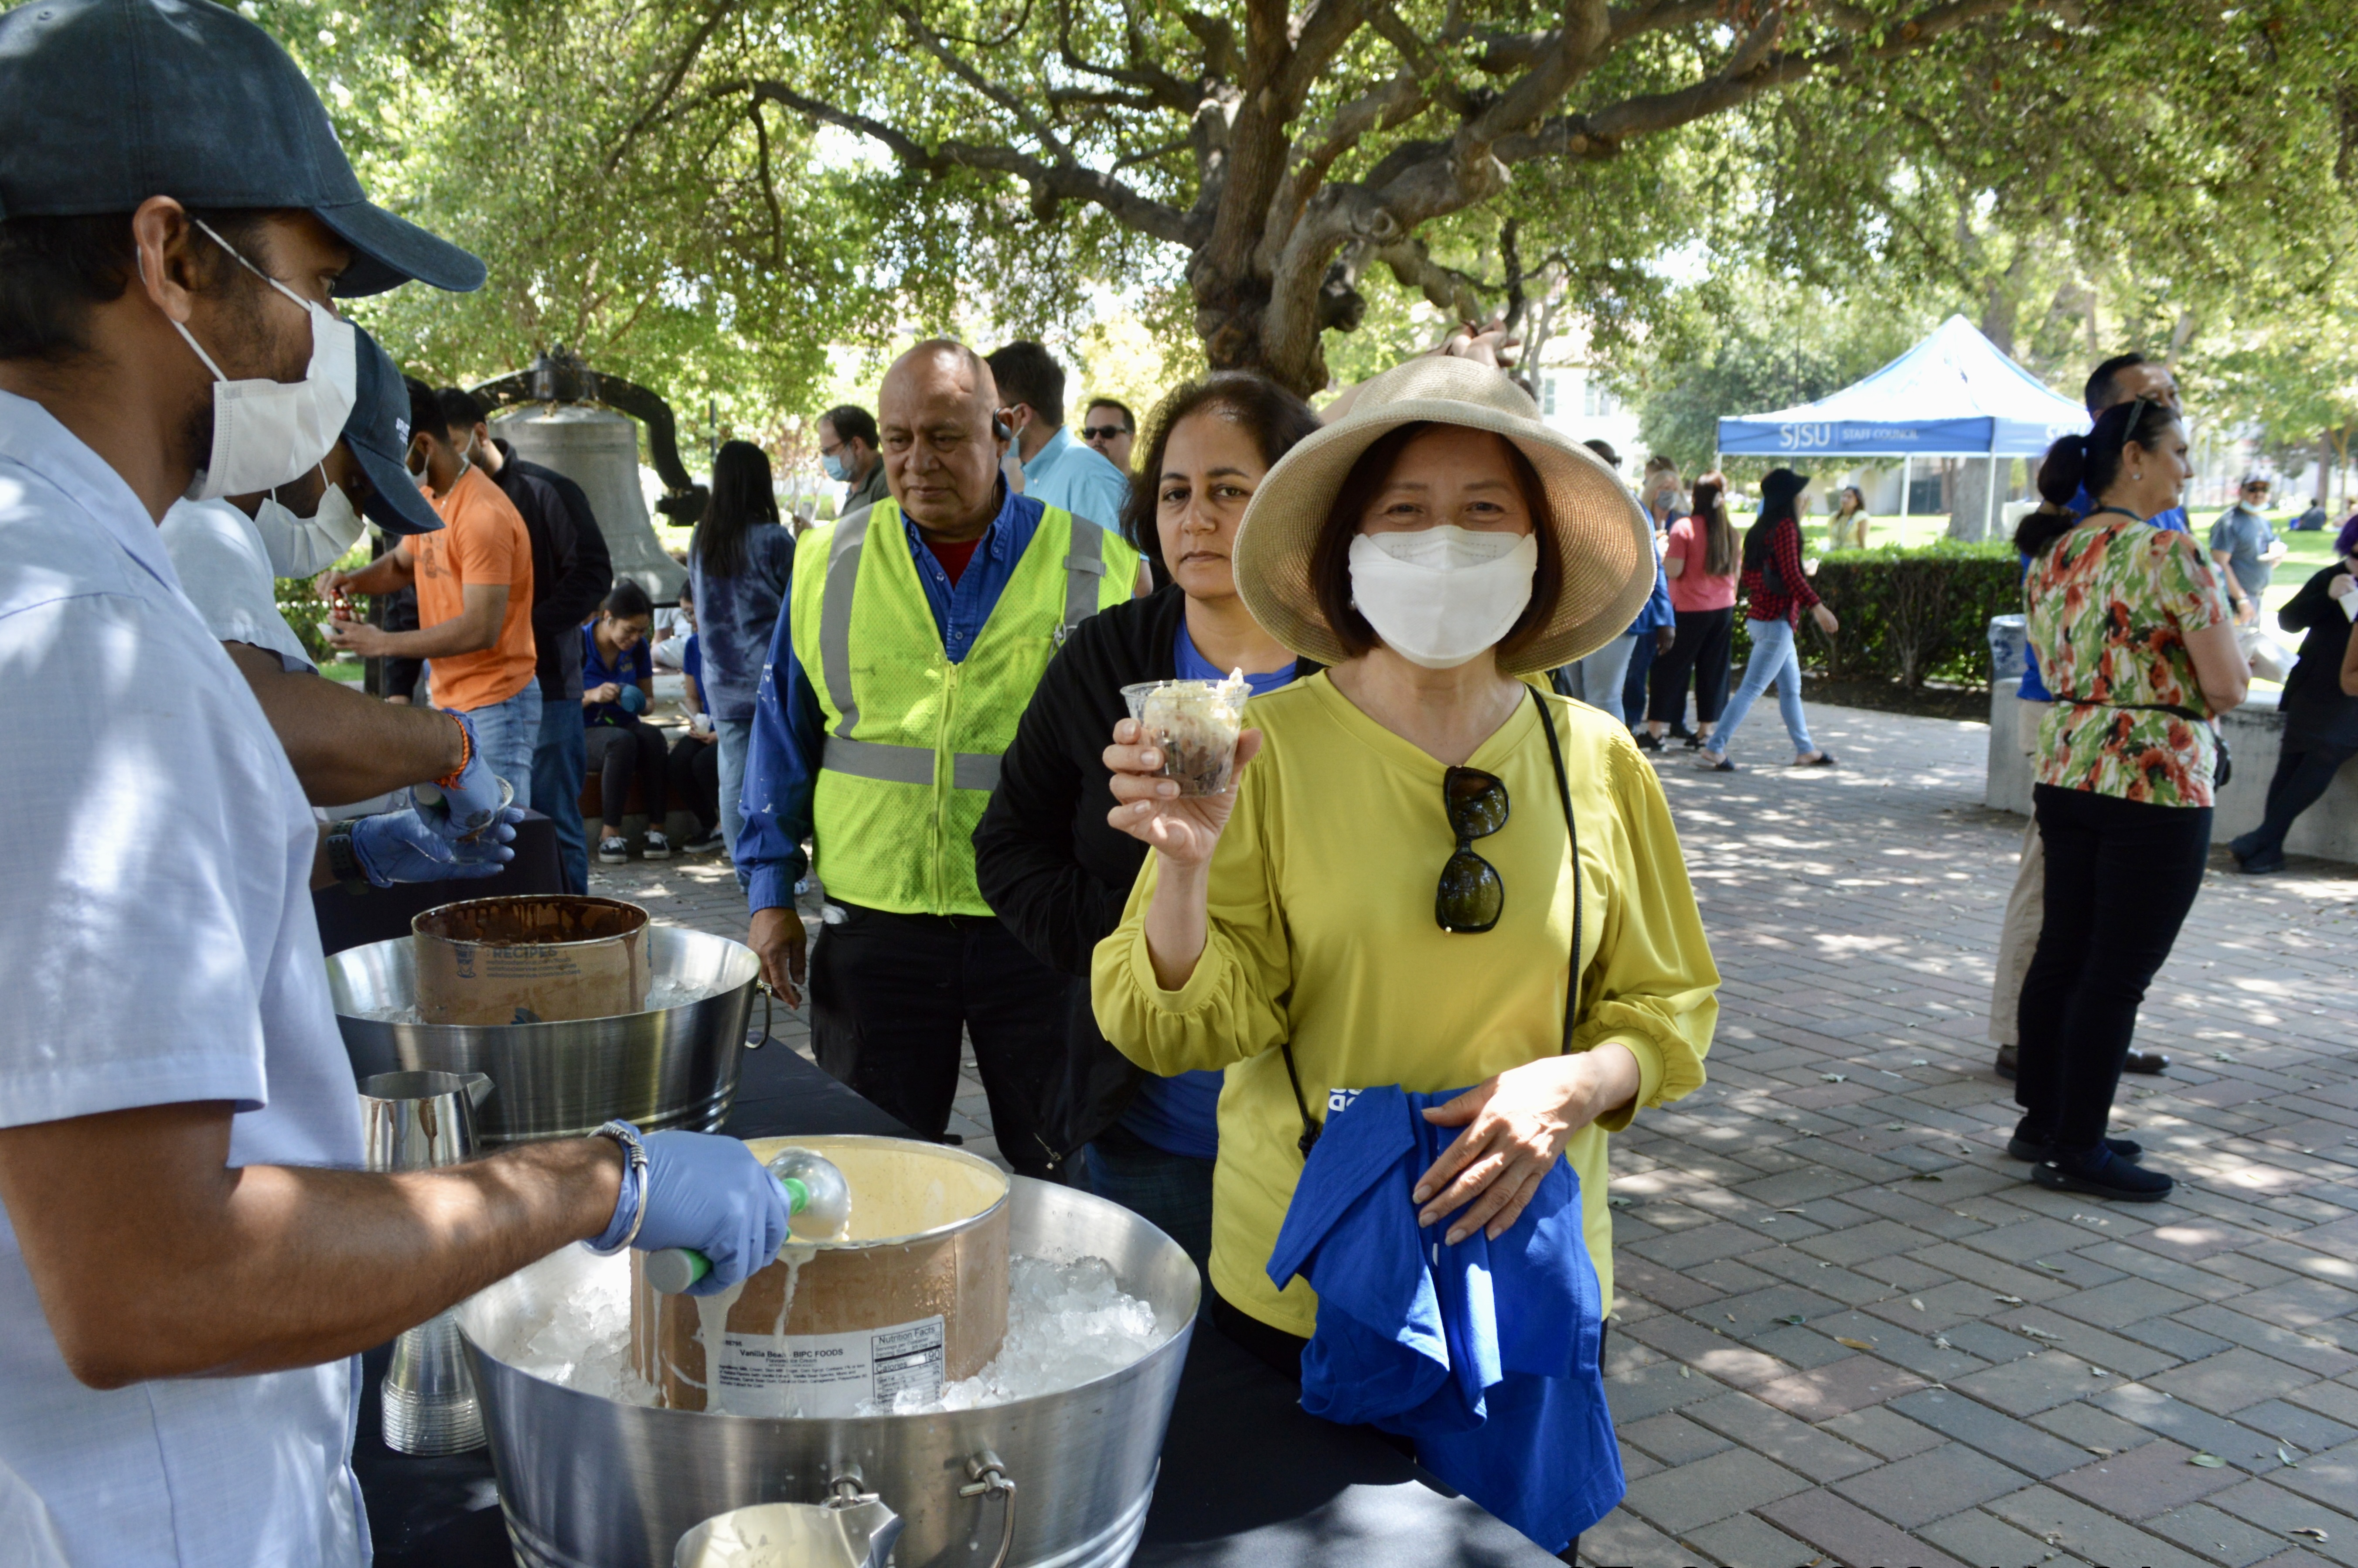 SJSU staff member stands near a table while holding a cup of ice cream.